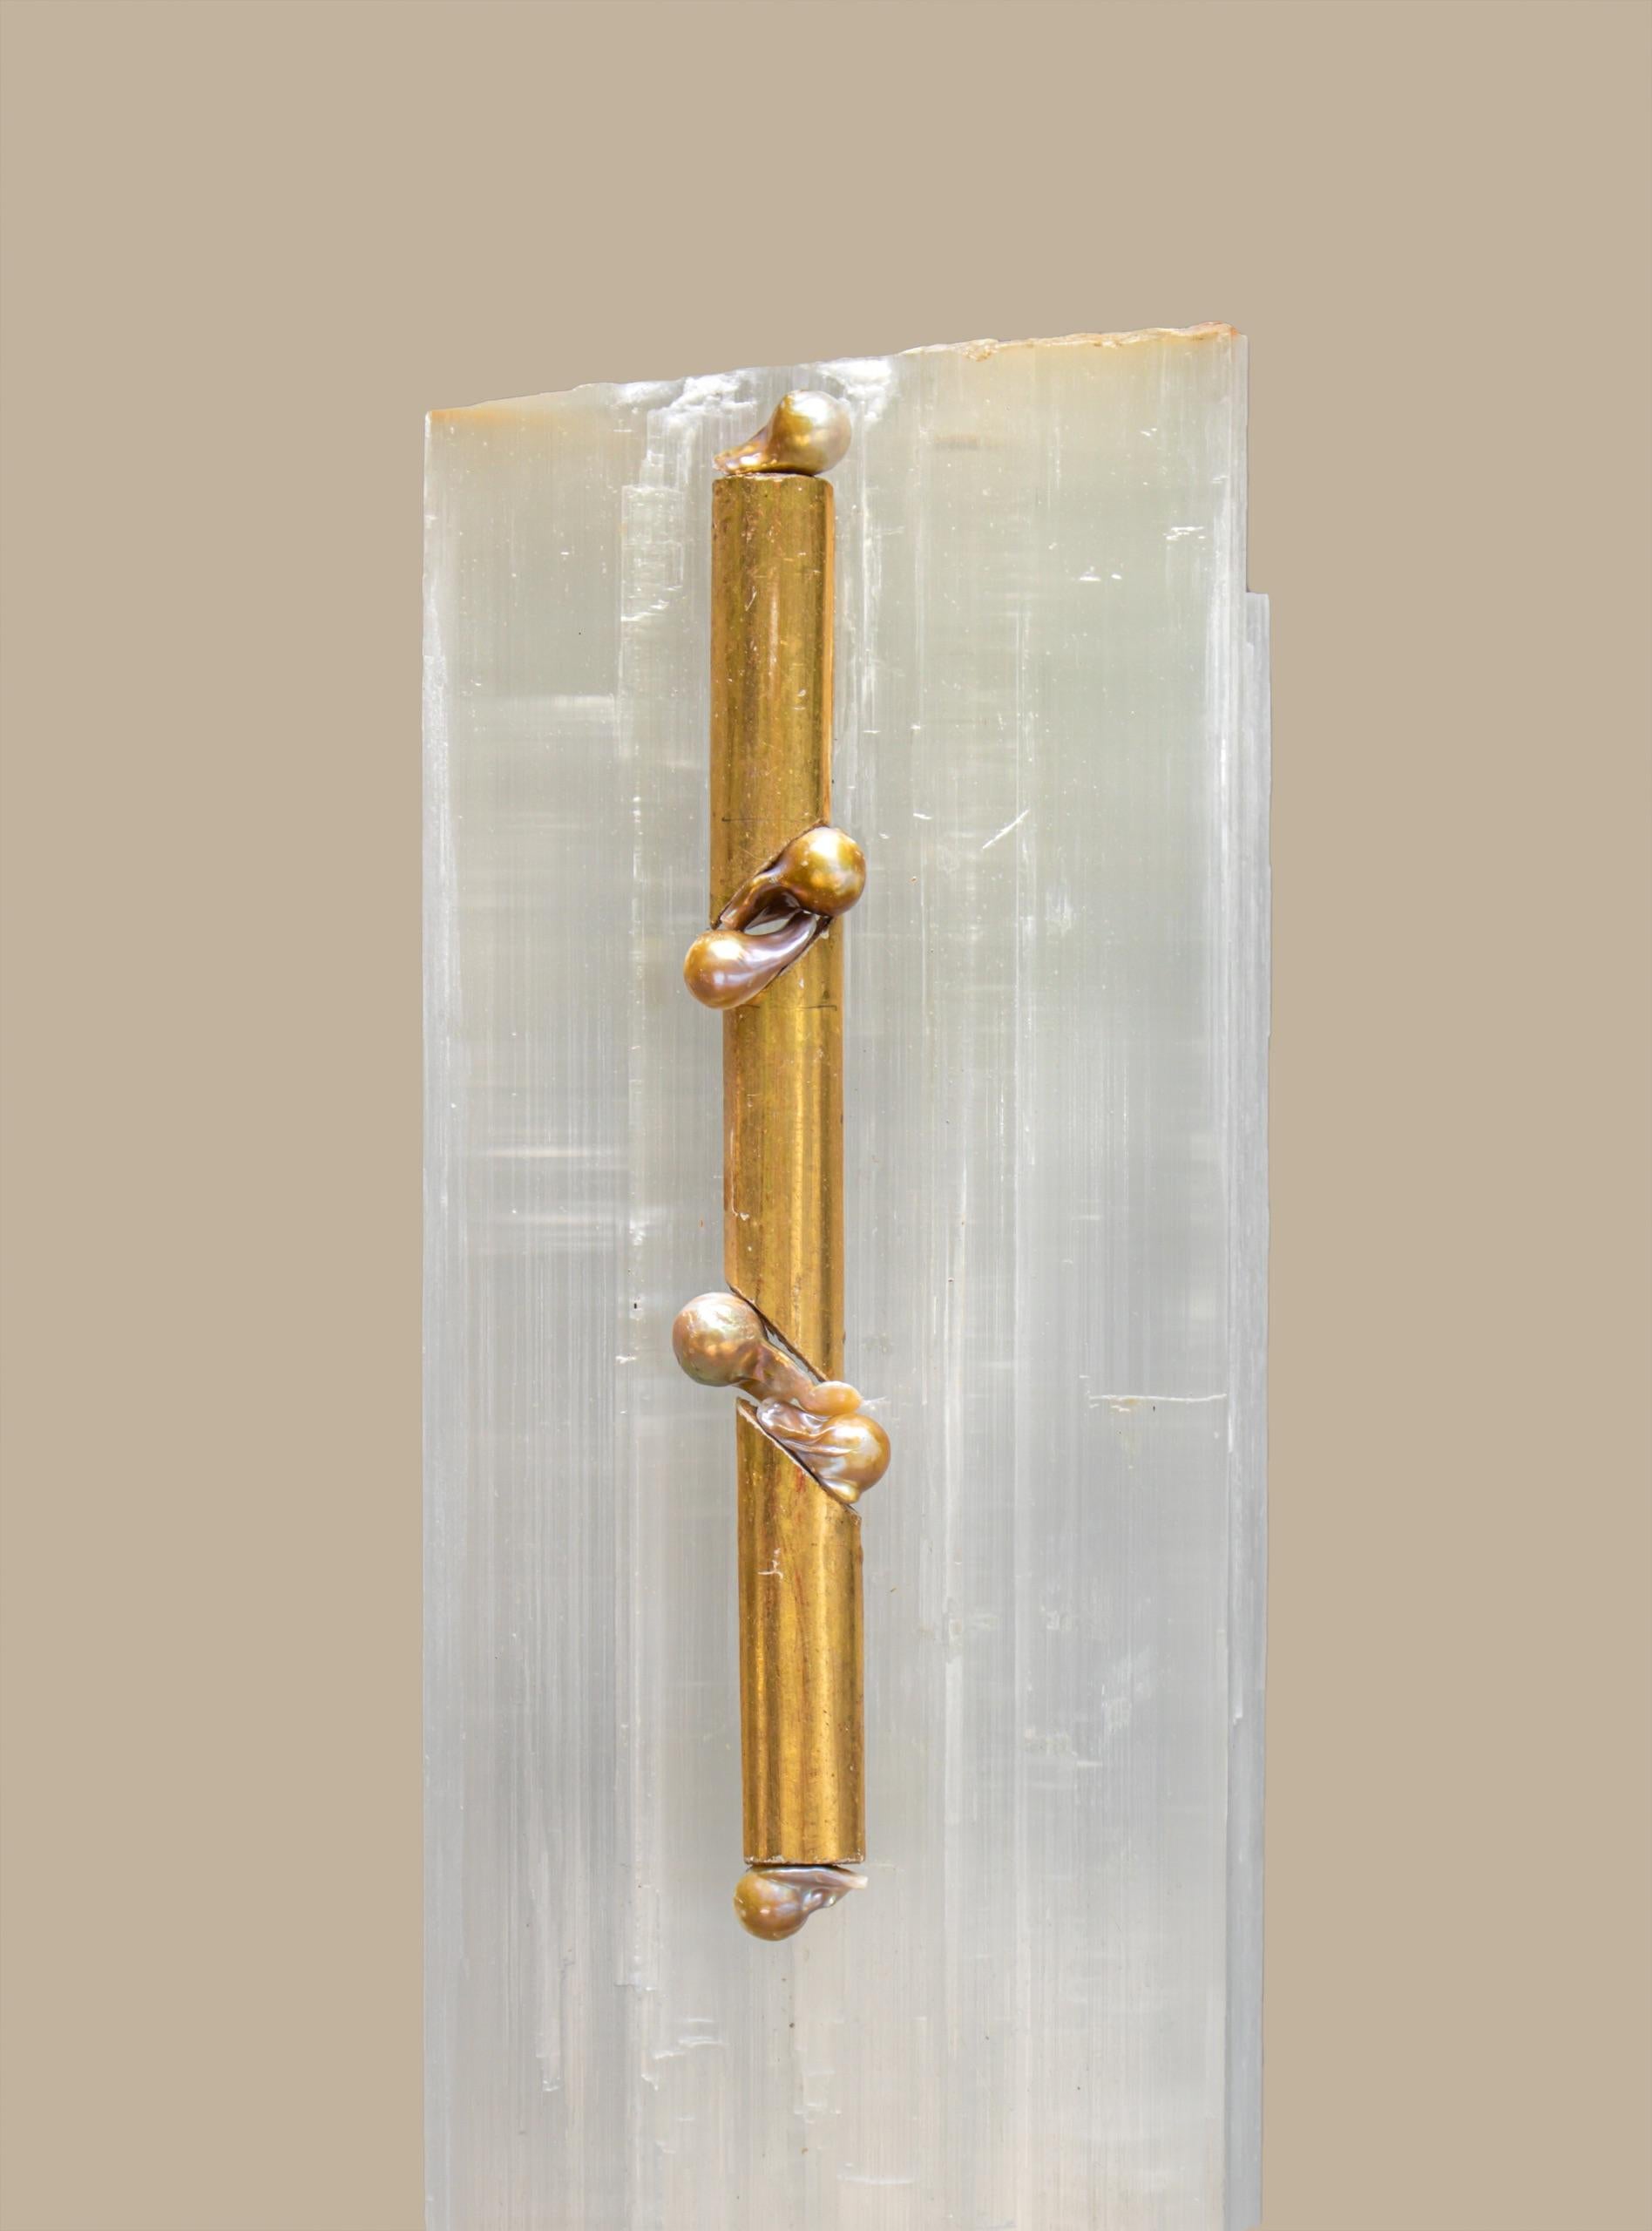 Ruler Selenite with an 18th century Italian gold leaf fragment molding and natural forming baroque pearls on a lucite base. Ruler selenite or 